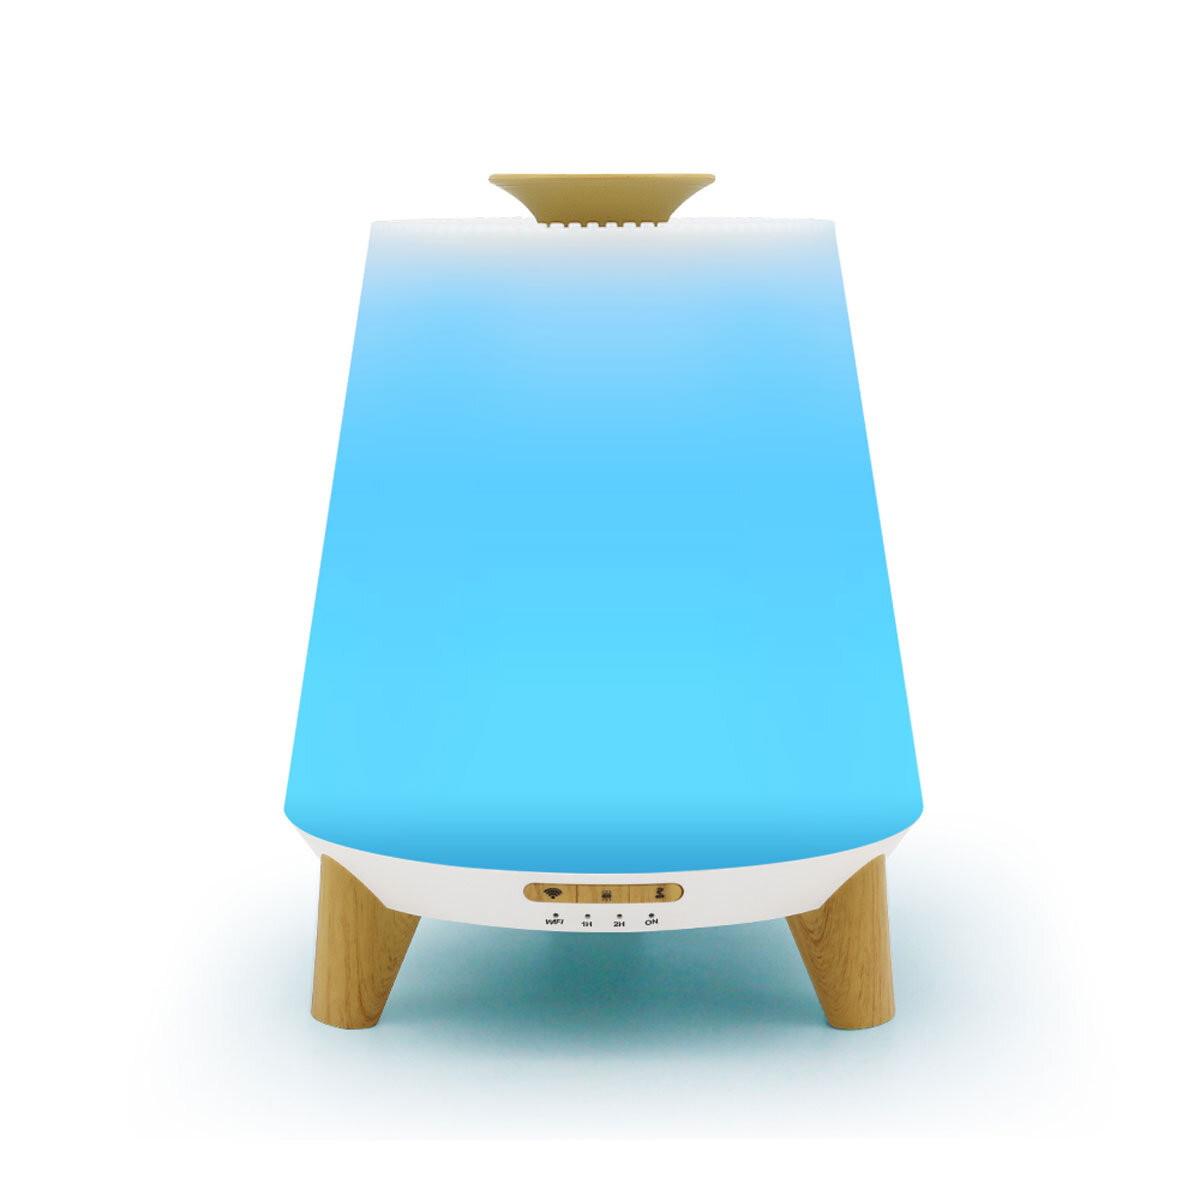 Image of Vybra Atmos Diffuser in blue